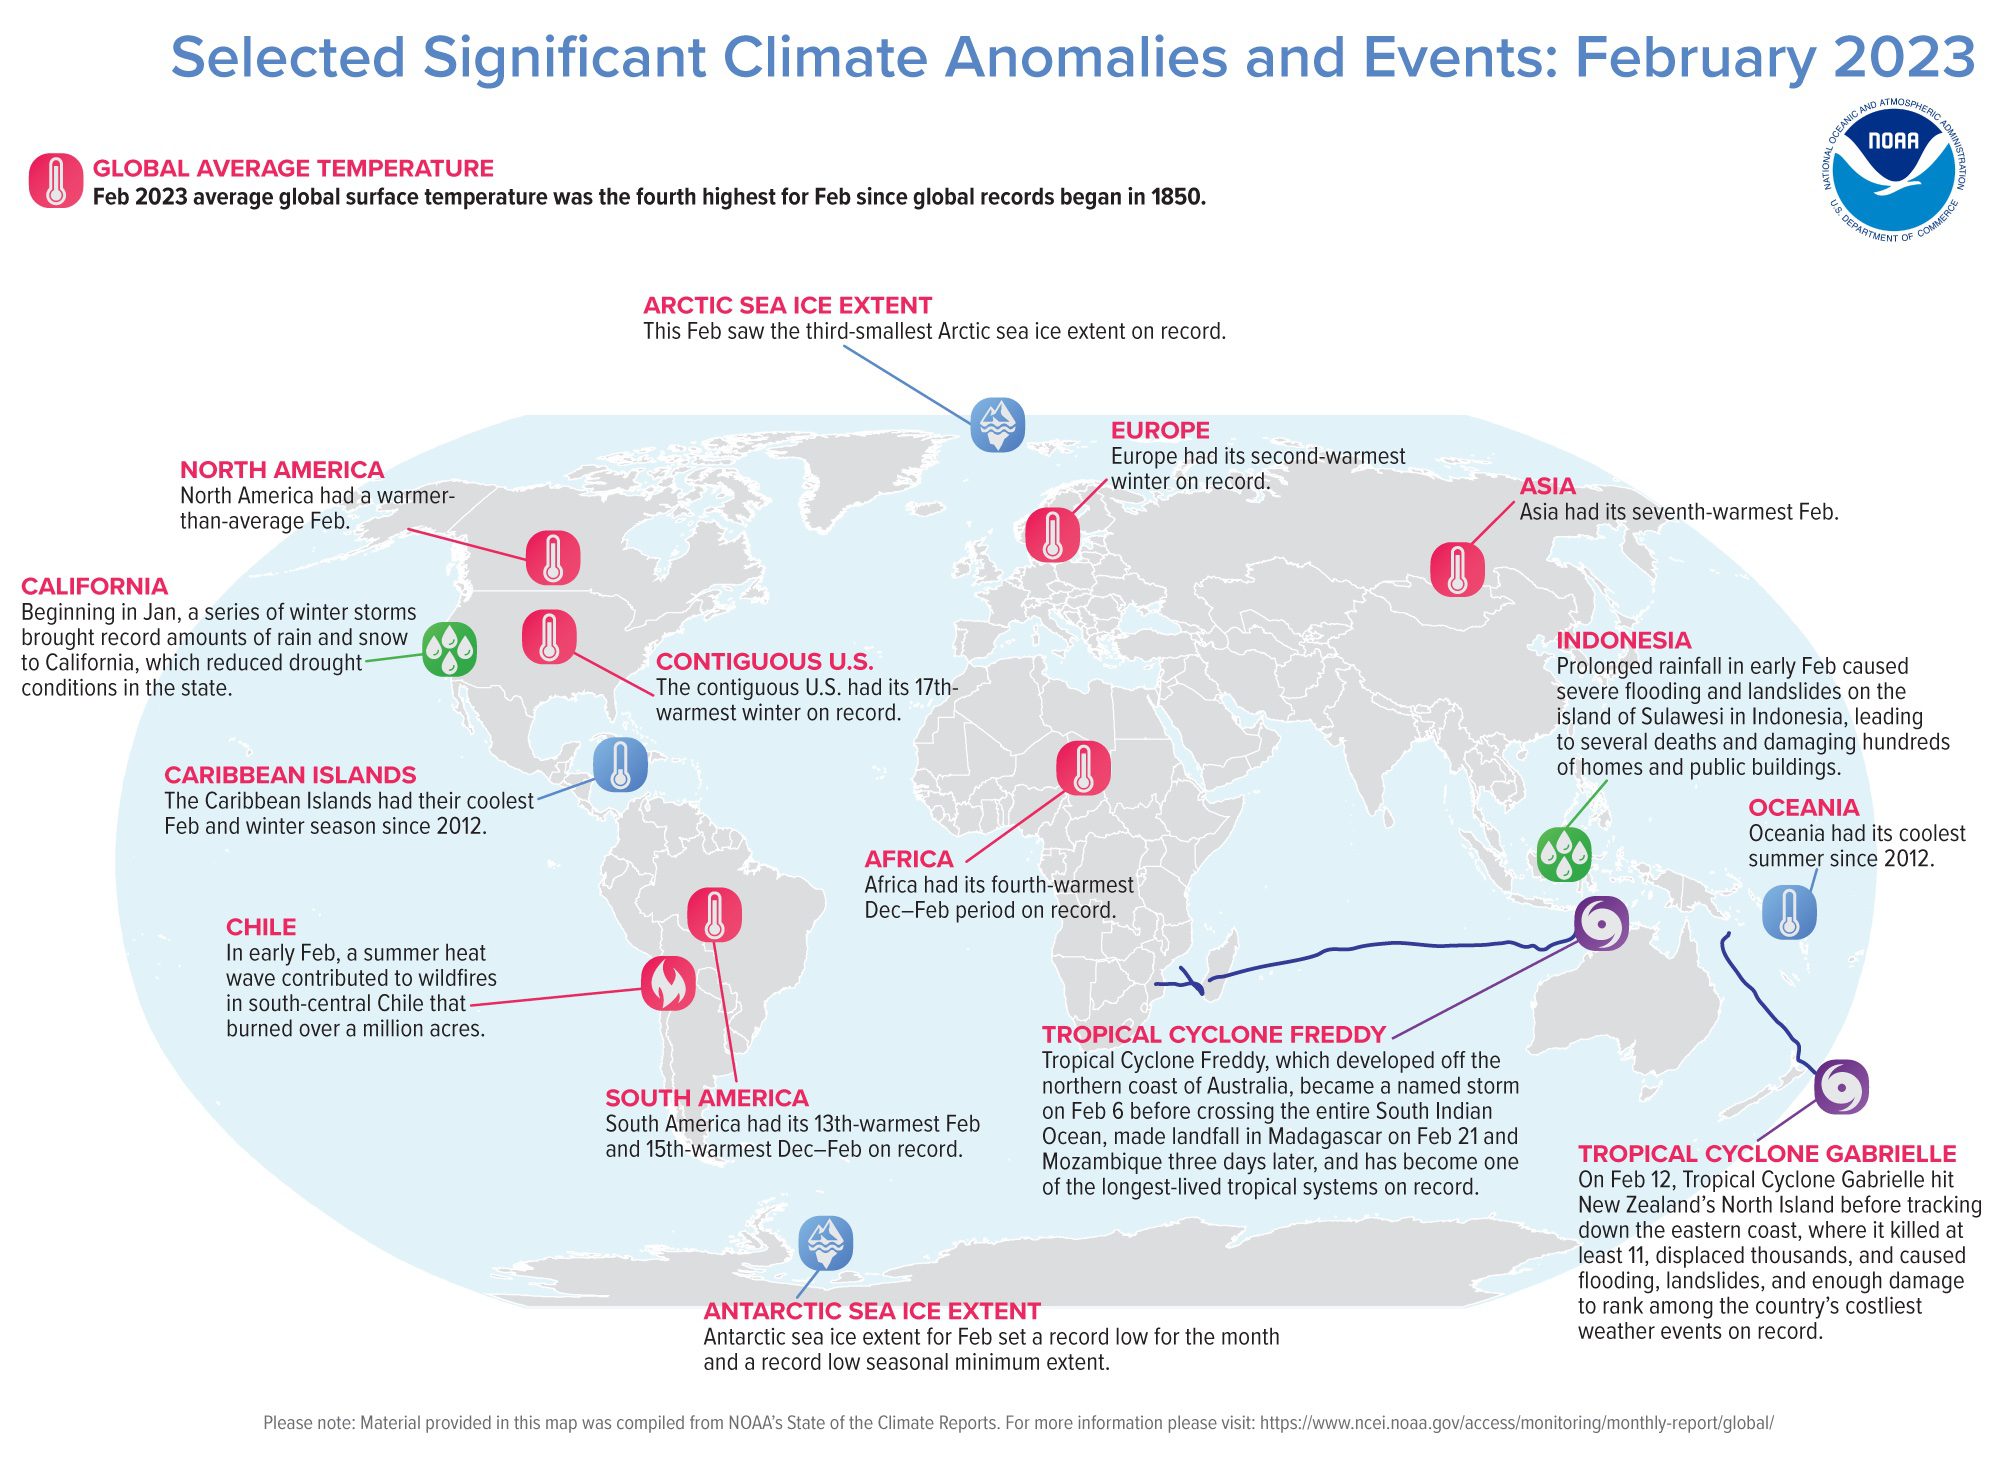 Climate anomalies and events seen across the globe in February 2023.